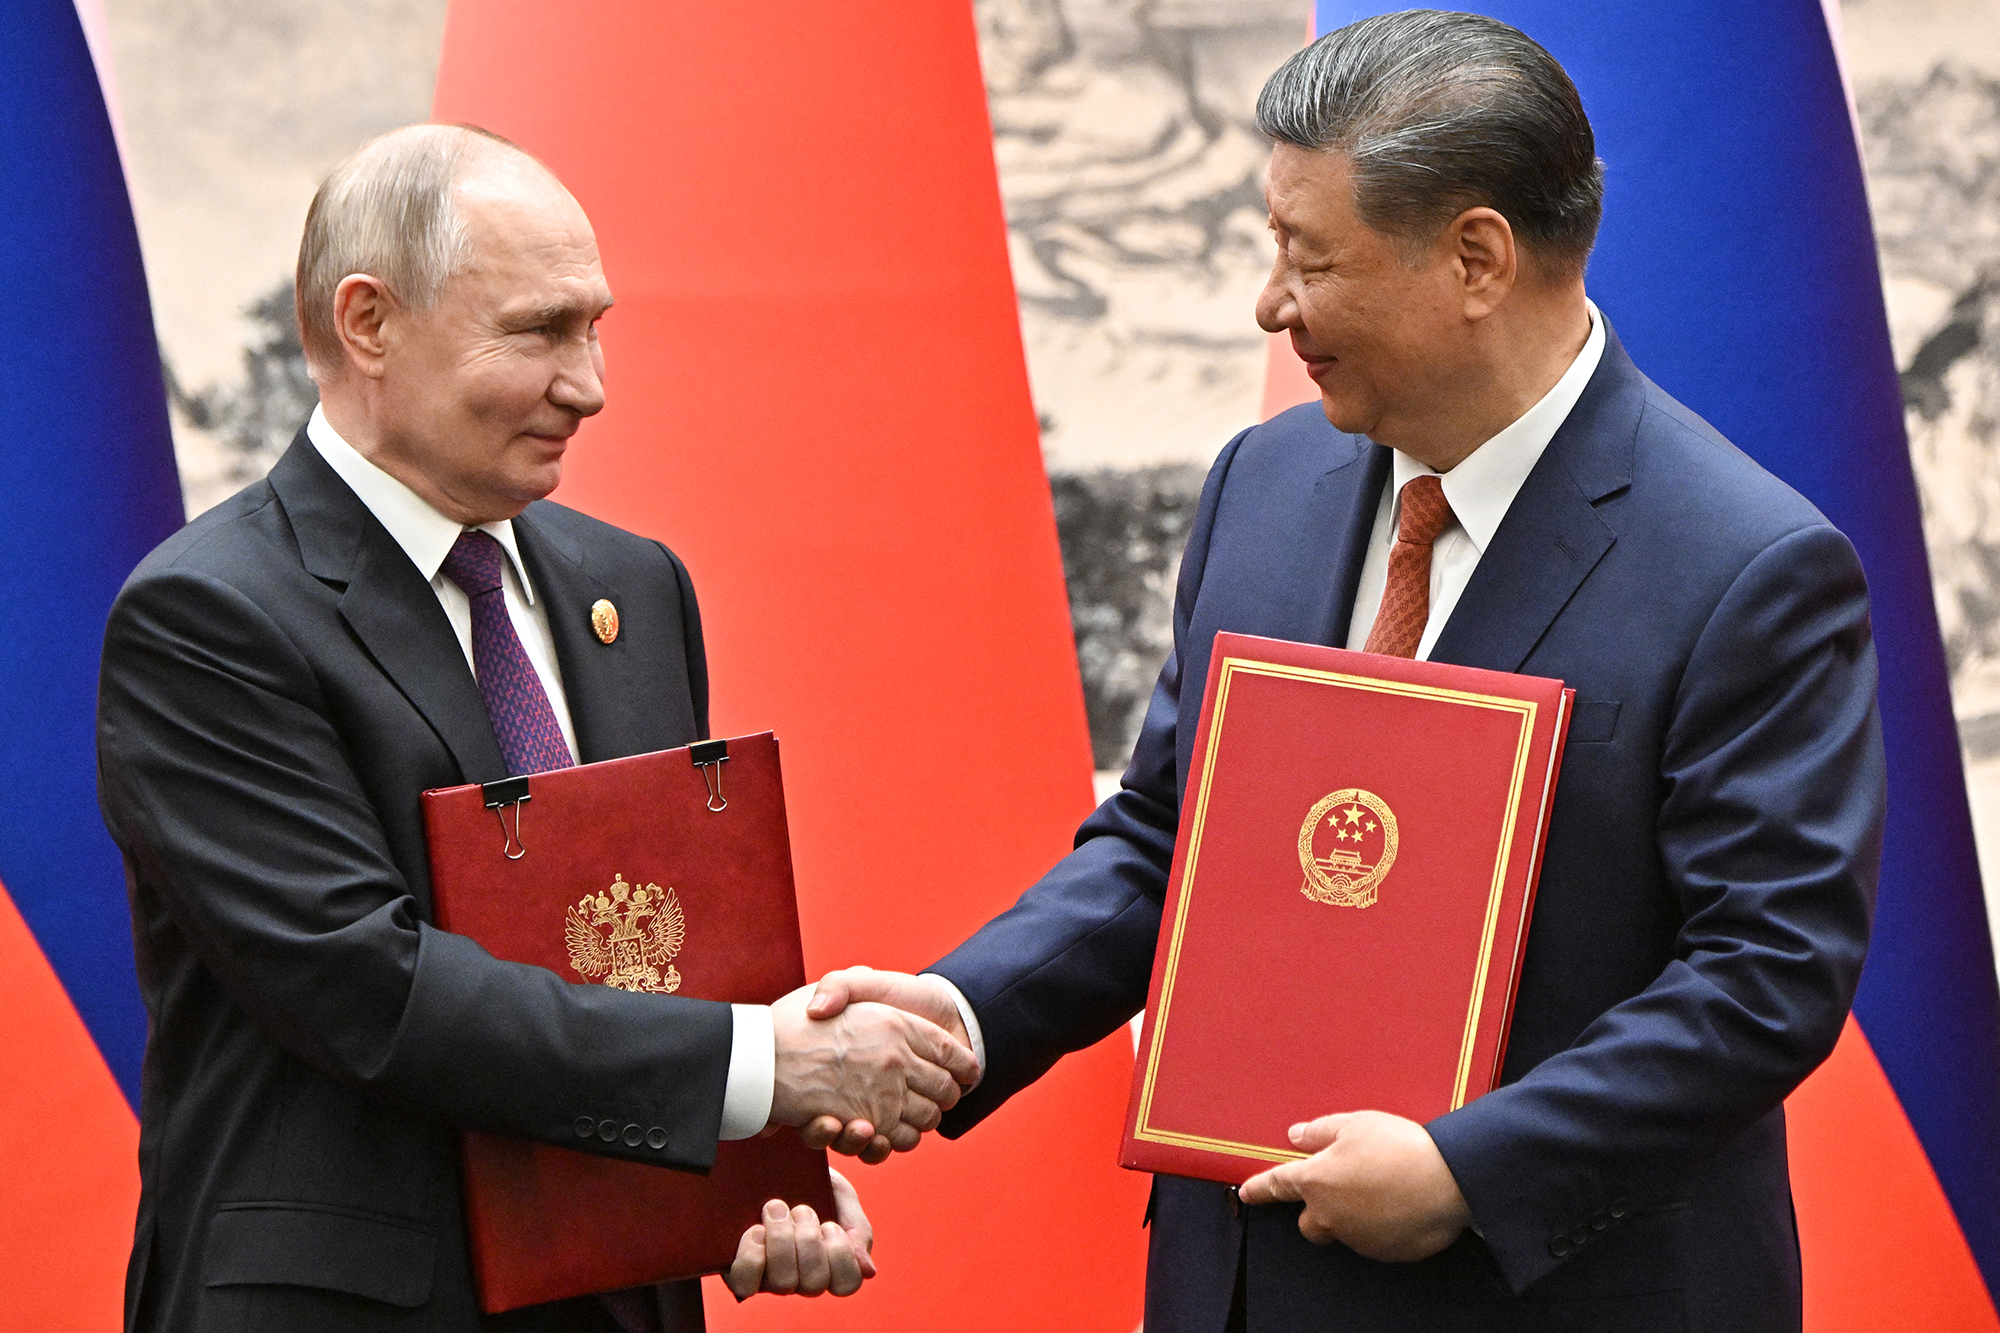 Russia's President Vladimir Putin, left, and China's President Xi Jinping exchange documents during a signing ceremony following their talks in Beijing on May 16.